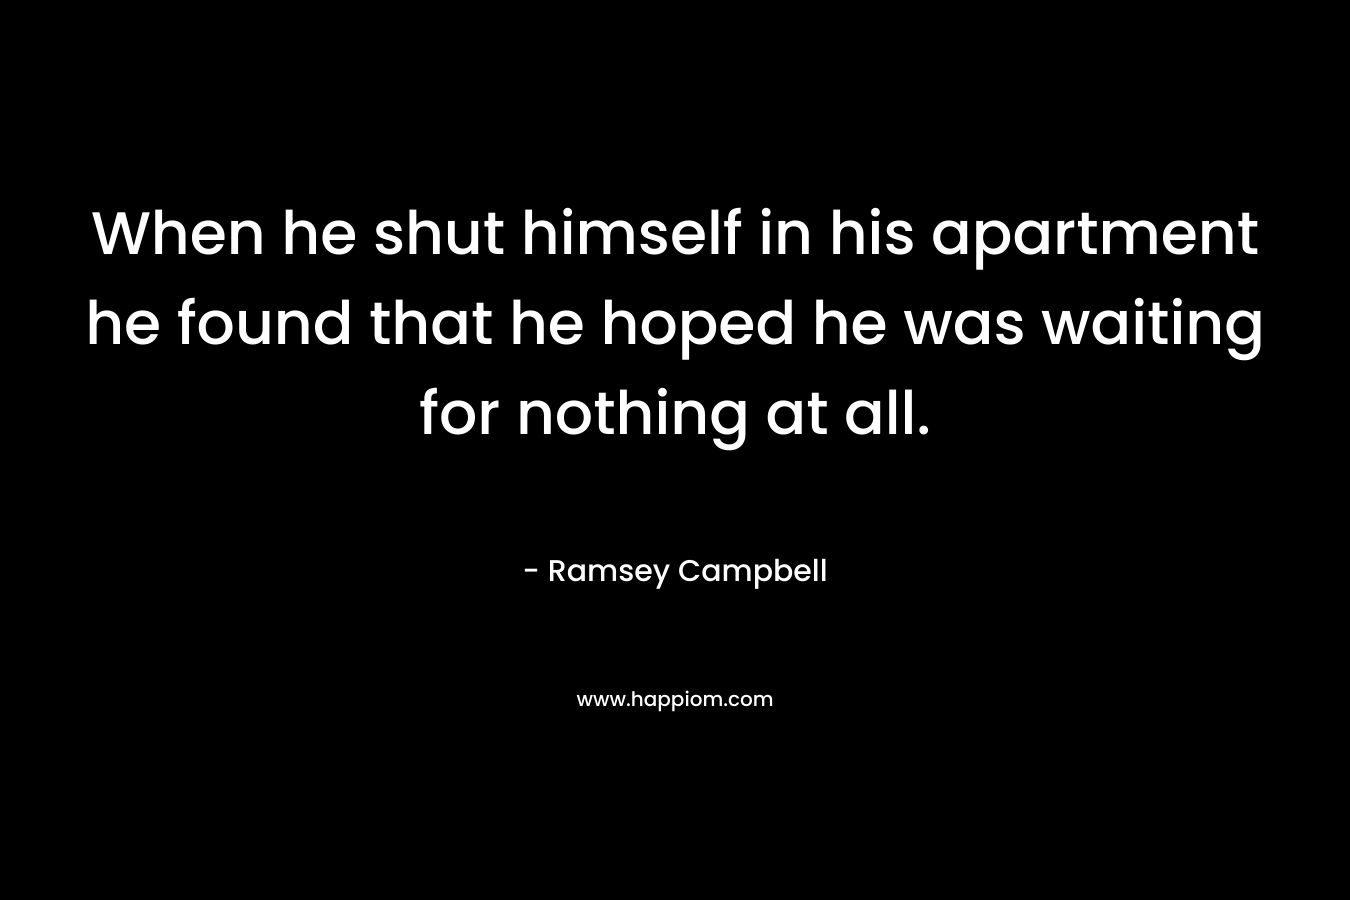 When he shut himself in his apartment he found that he hoped he was waiting for nothing at all. – Ramsey Campbell